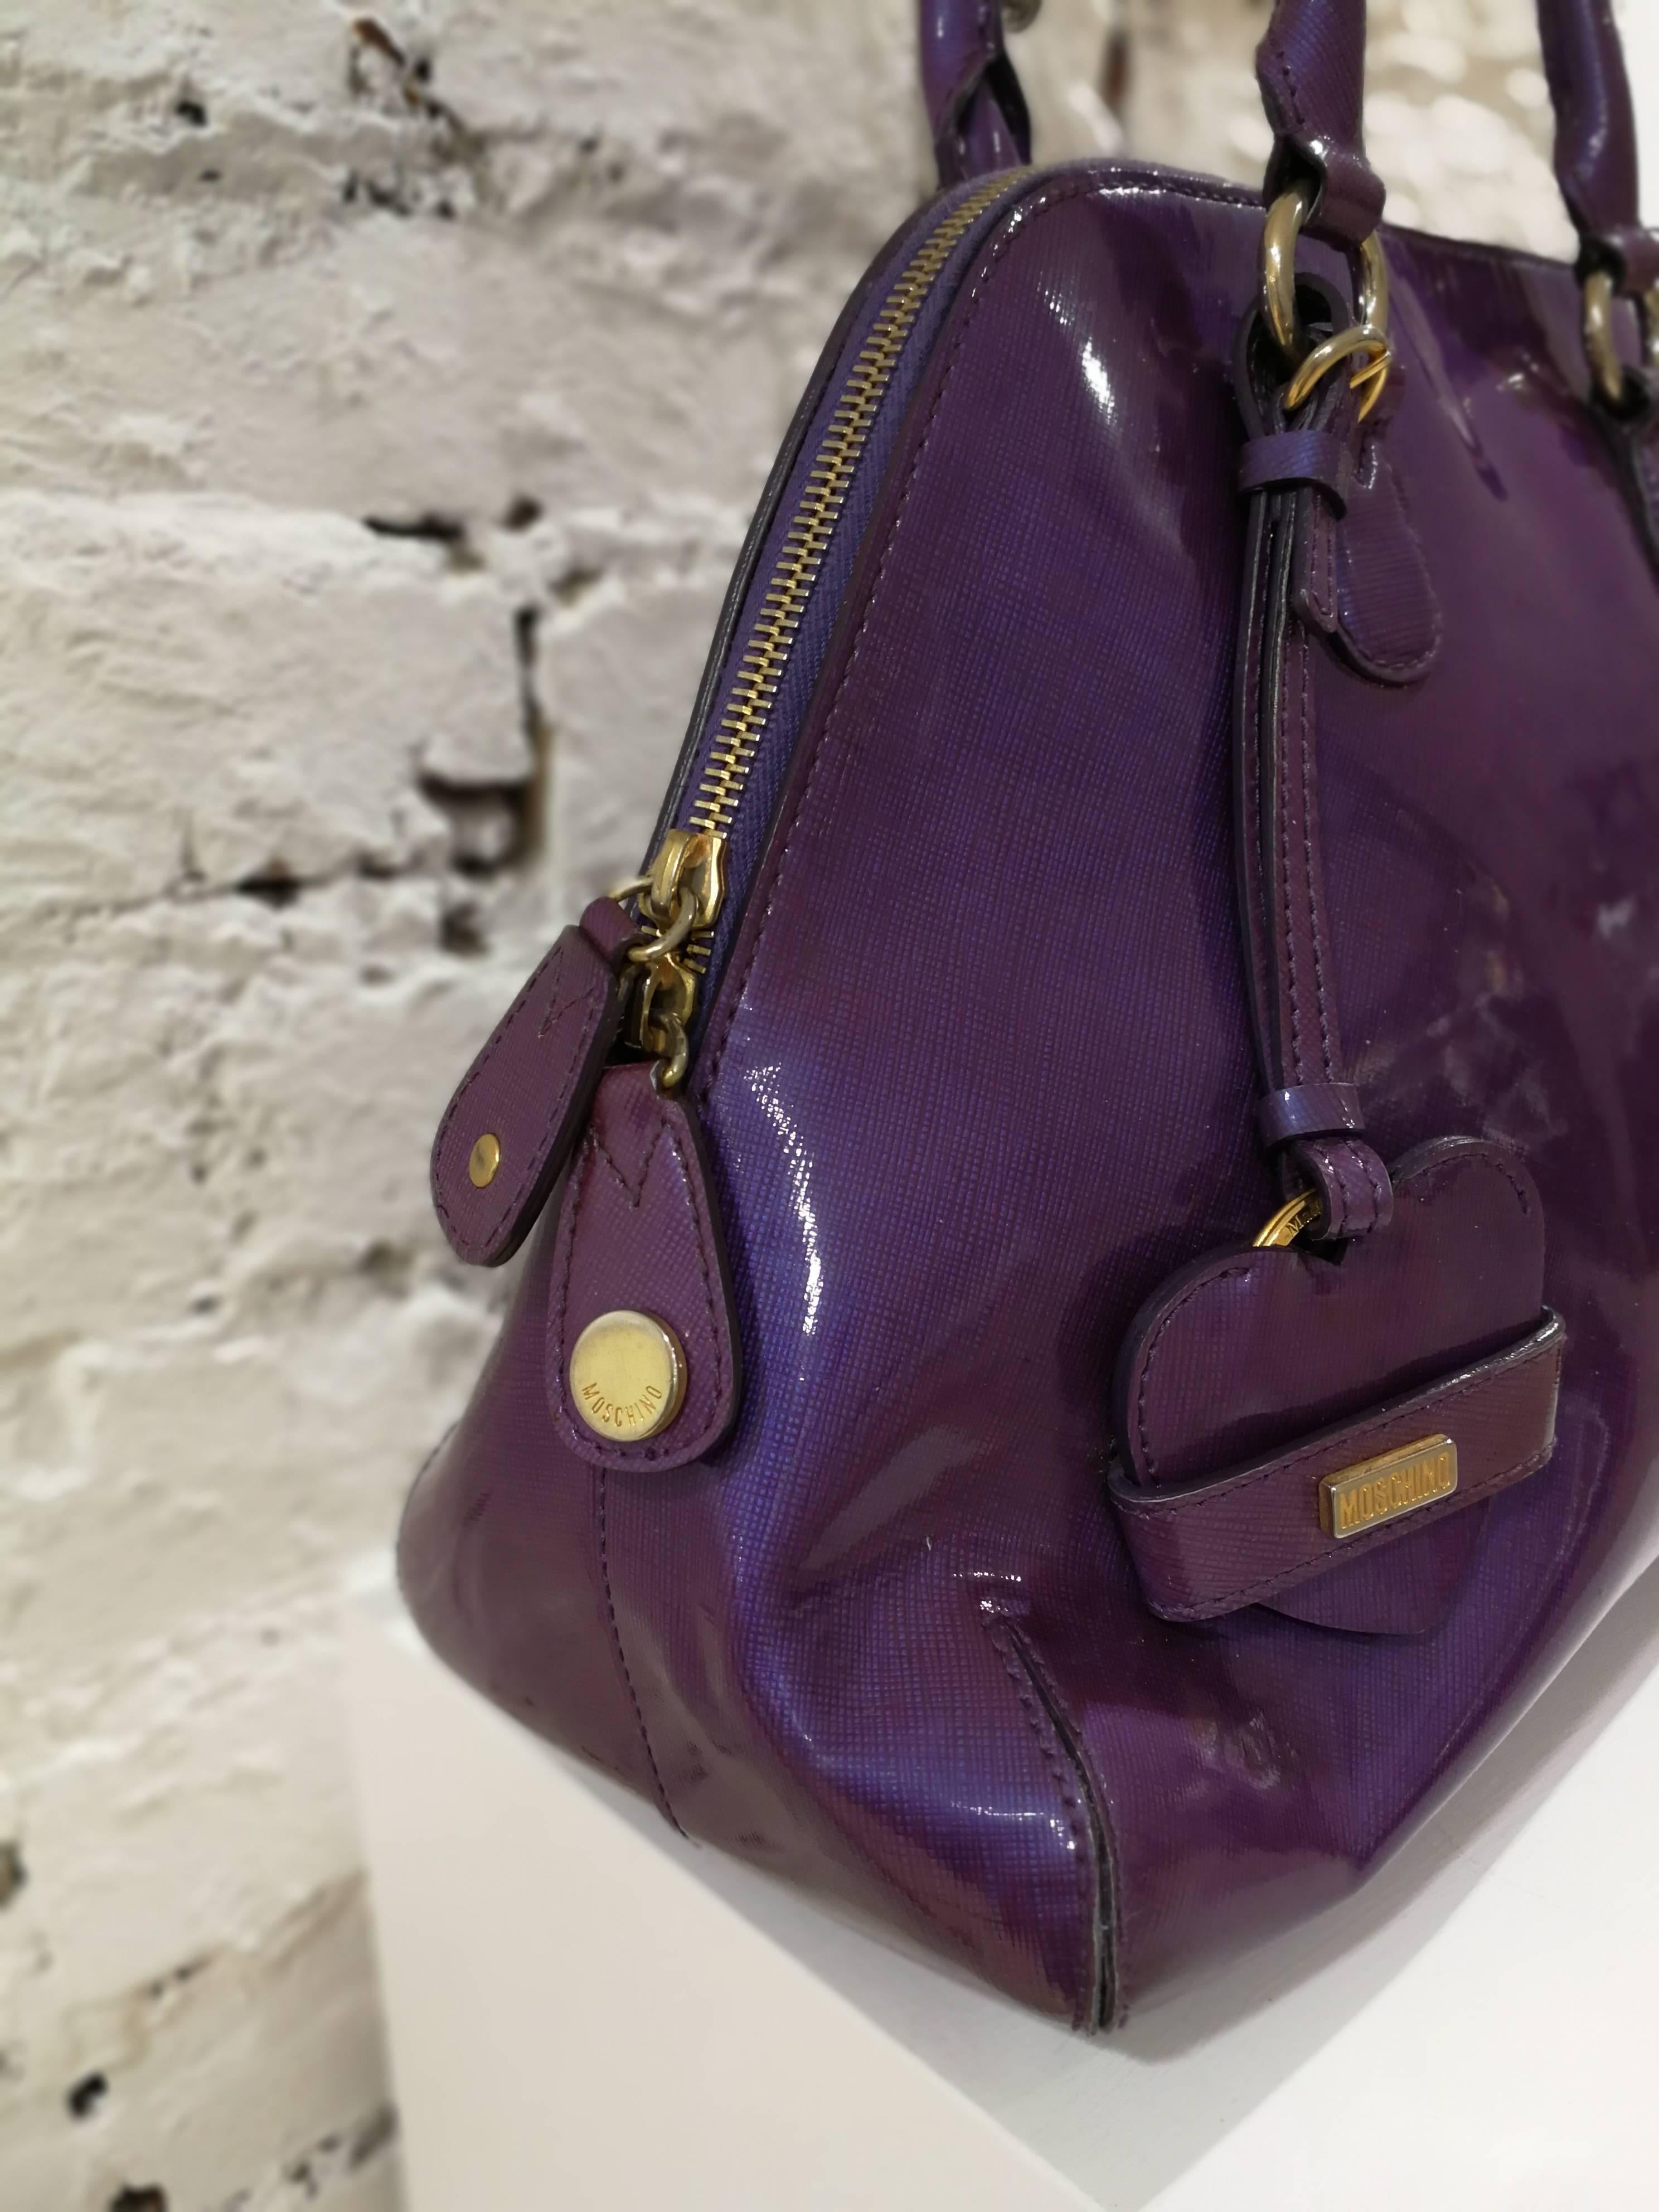 Moschino purple patent leather Bag

Moschino totally made in italy purple patent leather handle bag 

Can be easily add a shoulder strap

Gold tone hardware